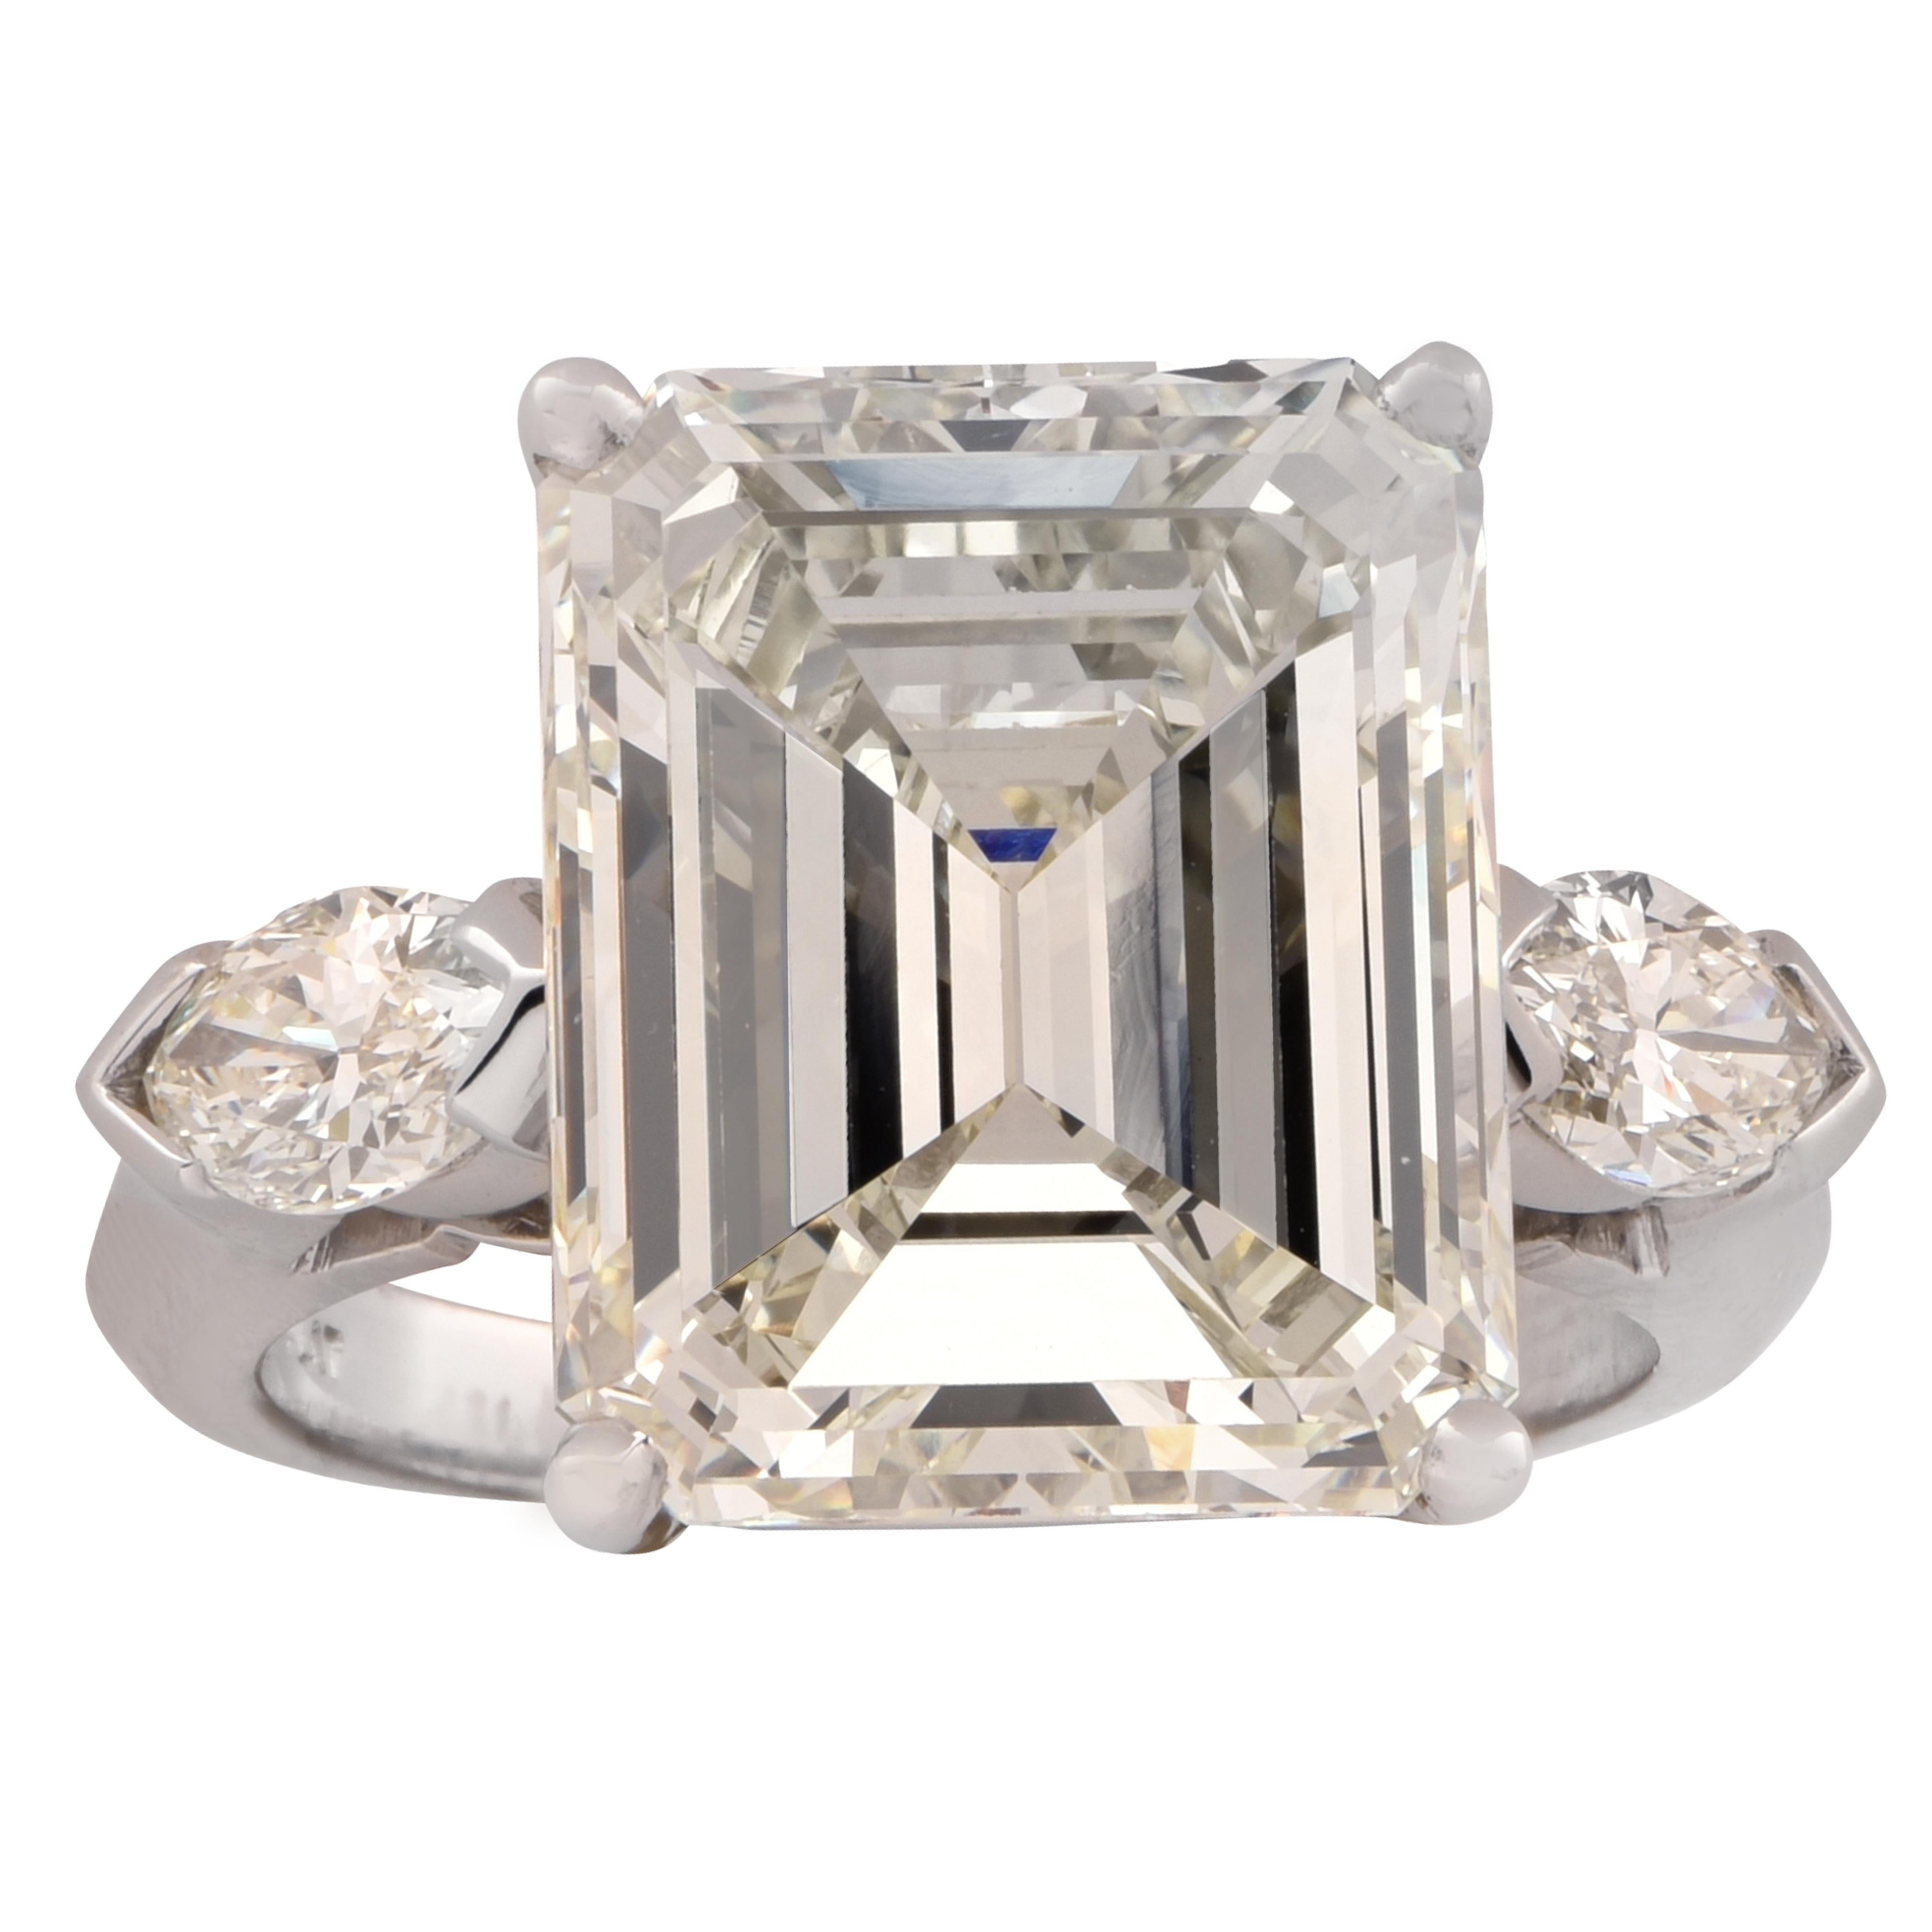 Spectacular engagement ring crafted in platinum showcasing a stunning GIA certified Emerald Cut Diamond weighing an impressive 9.29 carats, L color, VVS2 clarity. The band of the ring is adorned with 2 marquise cut diamonds weighing .60 carats